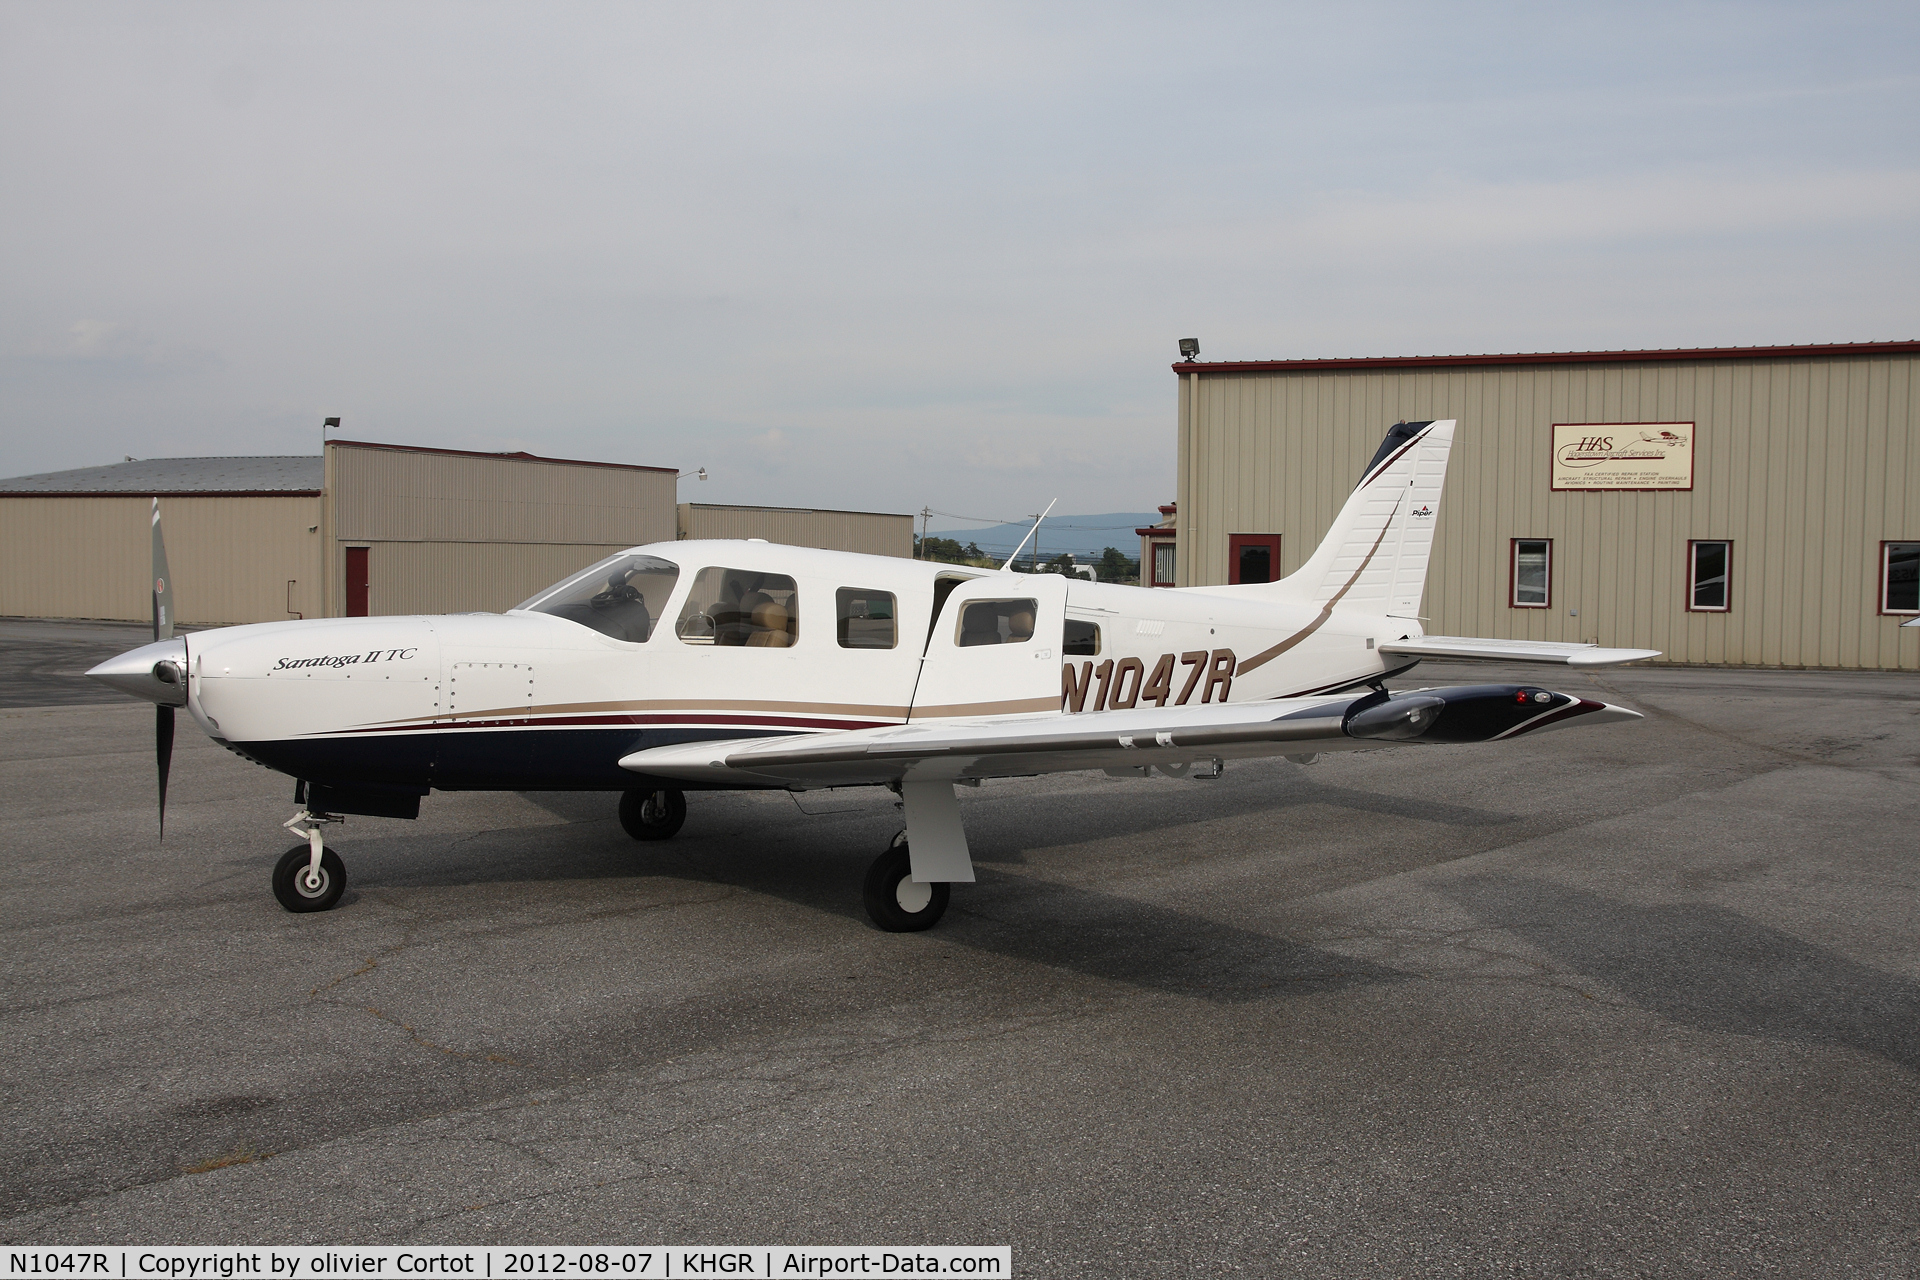 N1047R, 2007 Piper PA-32R-301T Turbo Saratoga C/N 3257464, Hagerstown airport